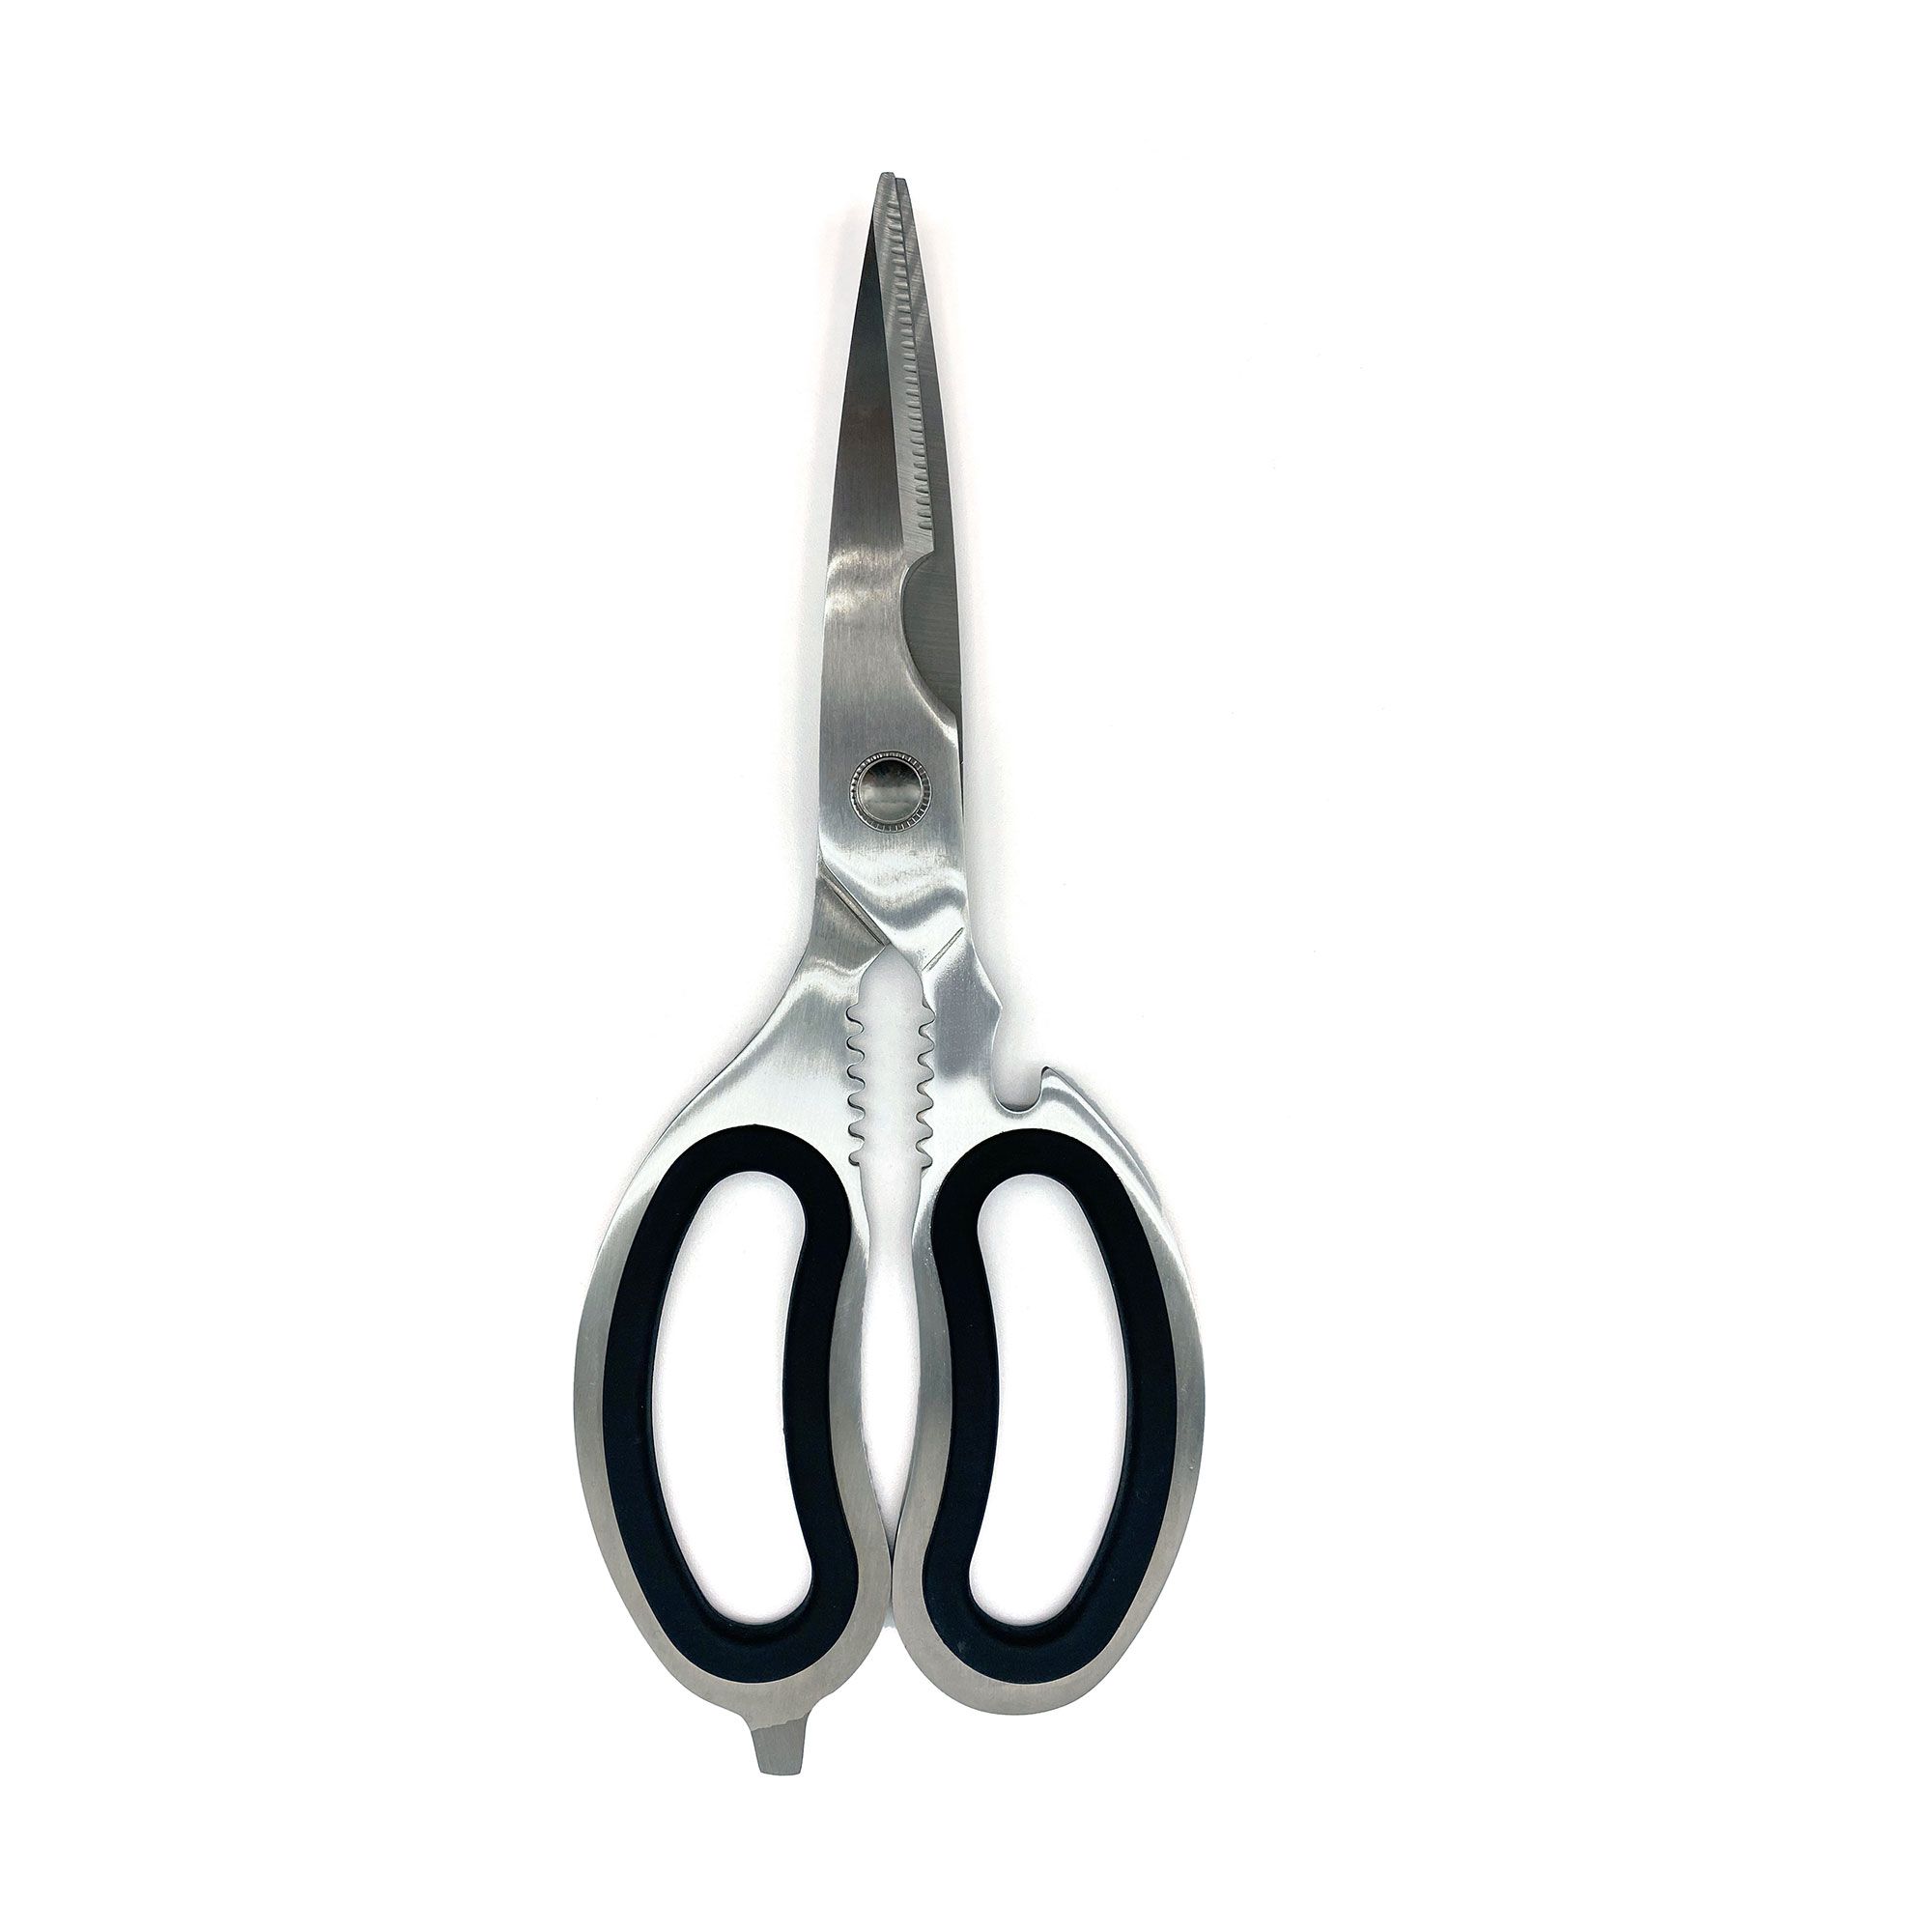  Chicago Cutlery Deluxe Multipurpose Stainless Steel Kitchen  Shears with Built-In Bottle Opener, For Left and Right Handed Users,  Resists Rust, Stains, and Pitting, Kitchen Scissors: Cutlery Sissors: Home  & Kitchen